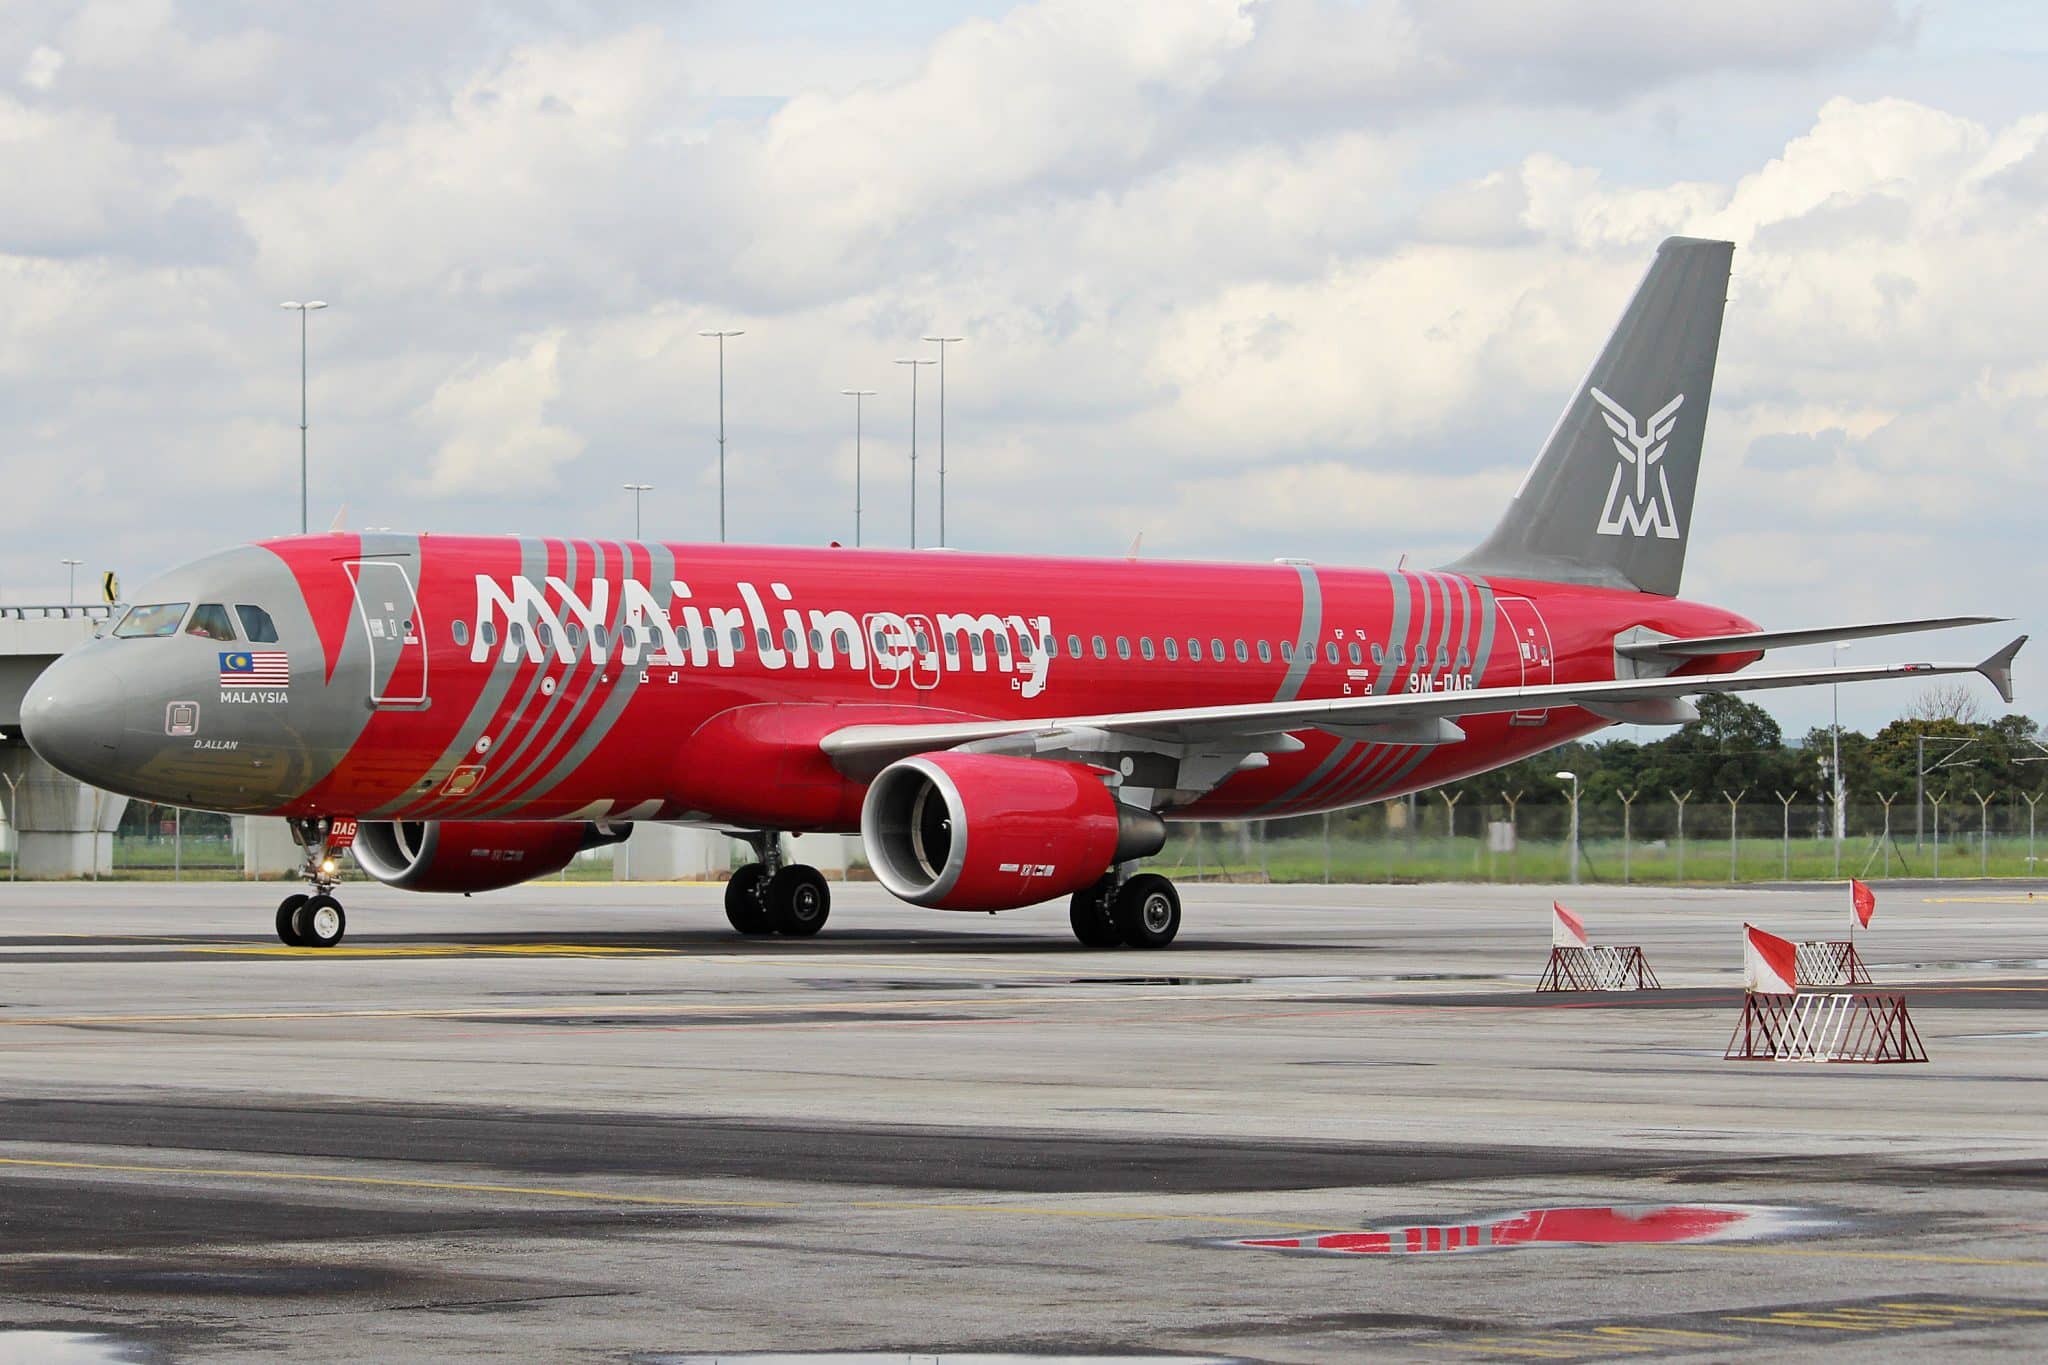 MYAirline receives 2-year AOC extension from CAAM